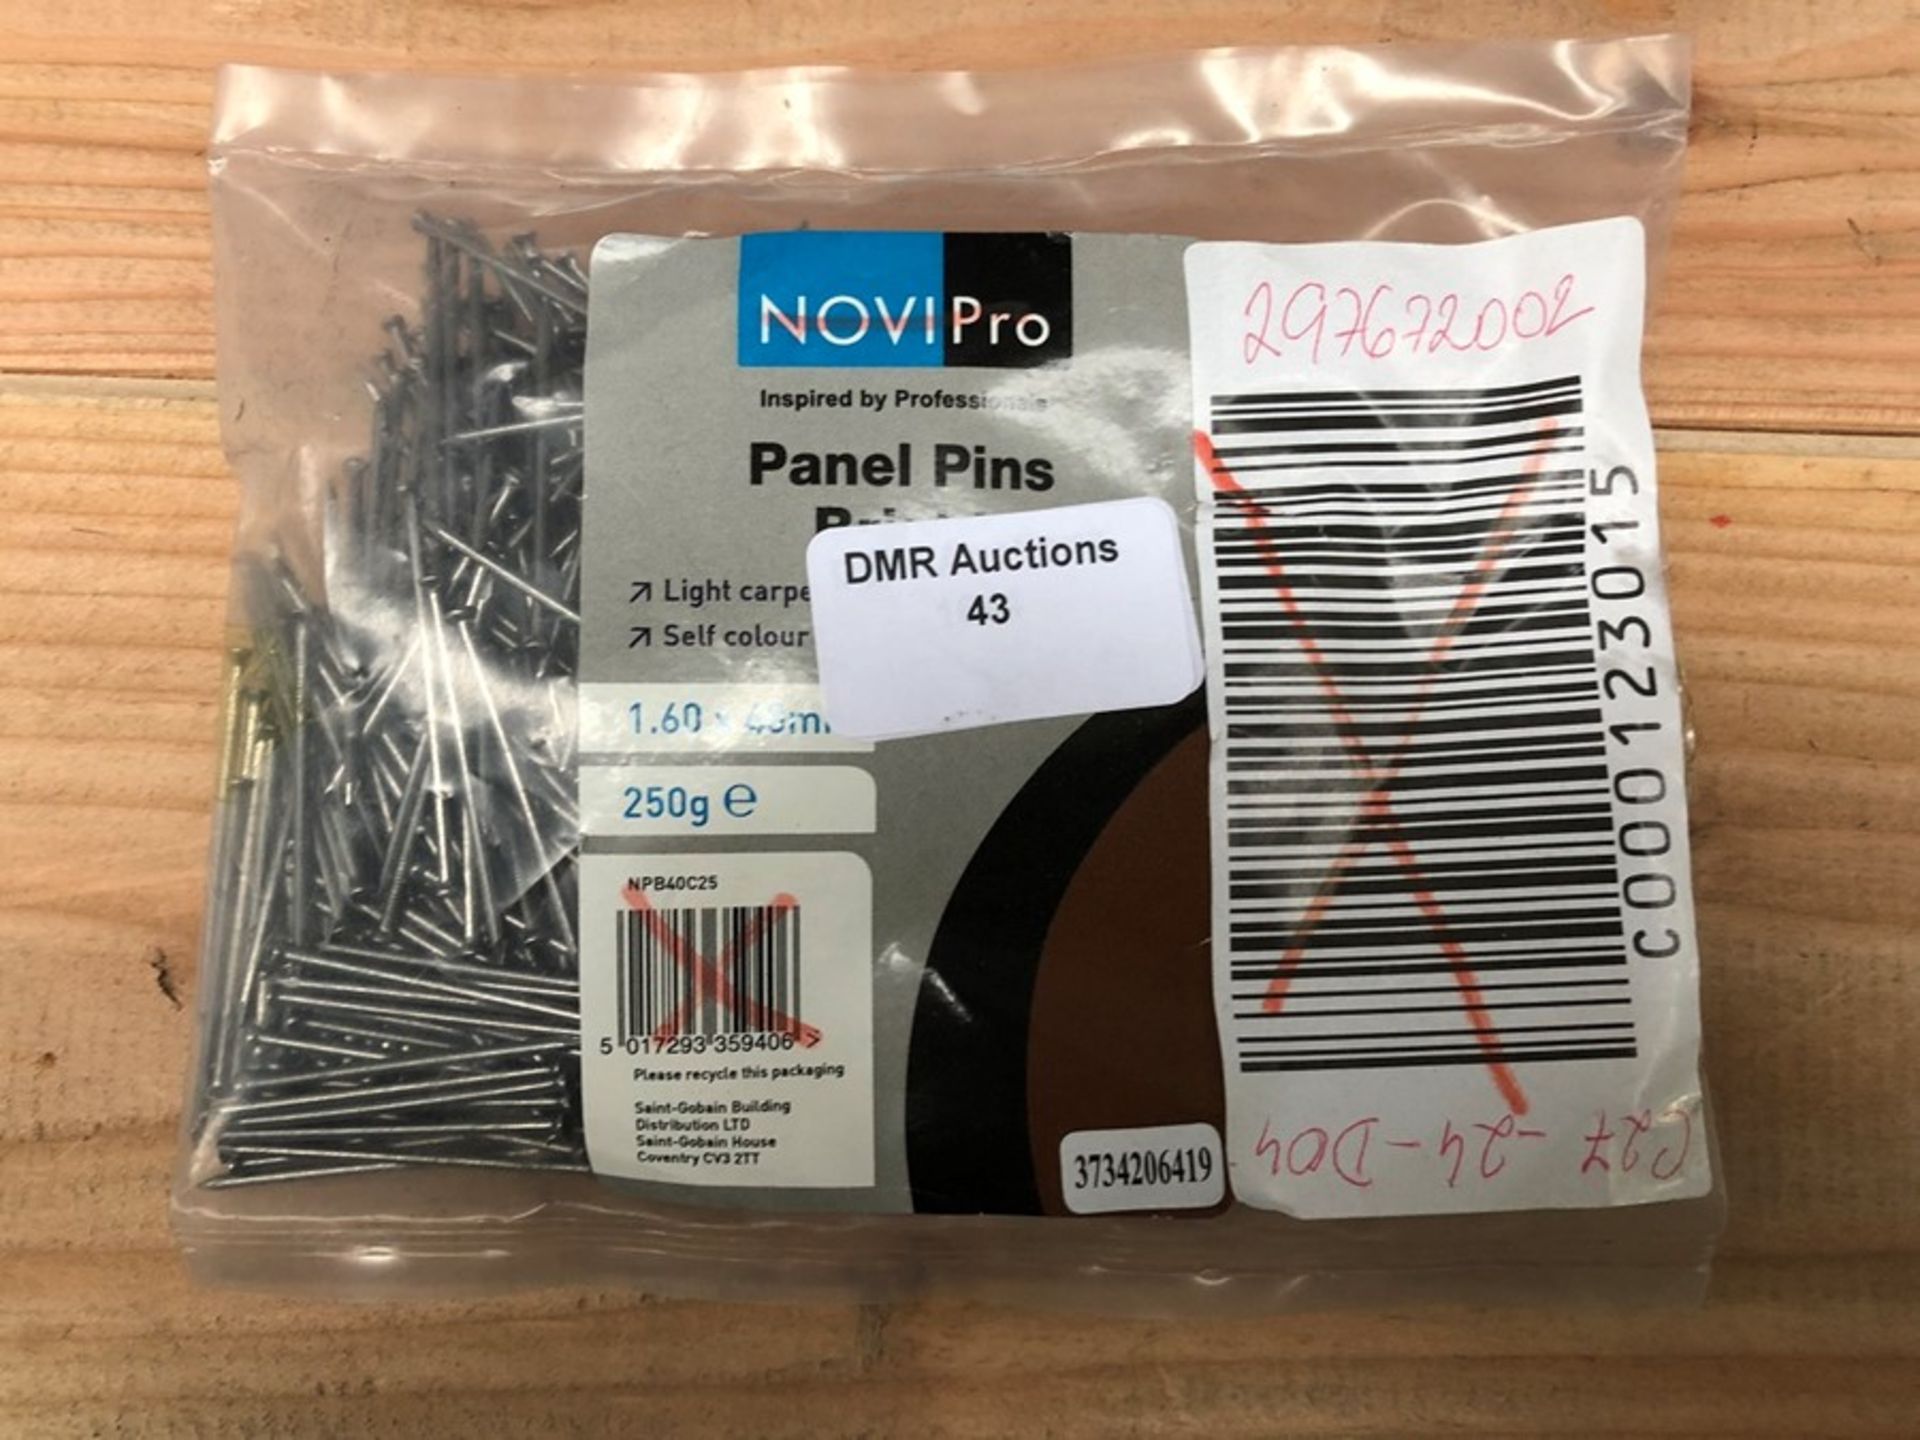 1 BAG OF NOVIPRO PANEL PINS BRIGHT / SIZE: 1.60 X 40MM / PN - 722 (PUBLIC VIEWING AVAILABLE)